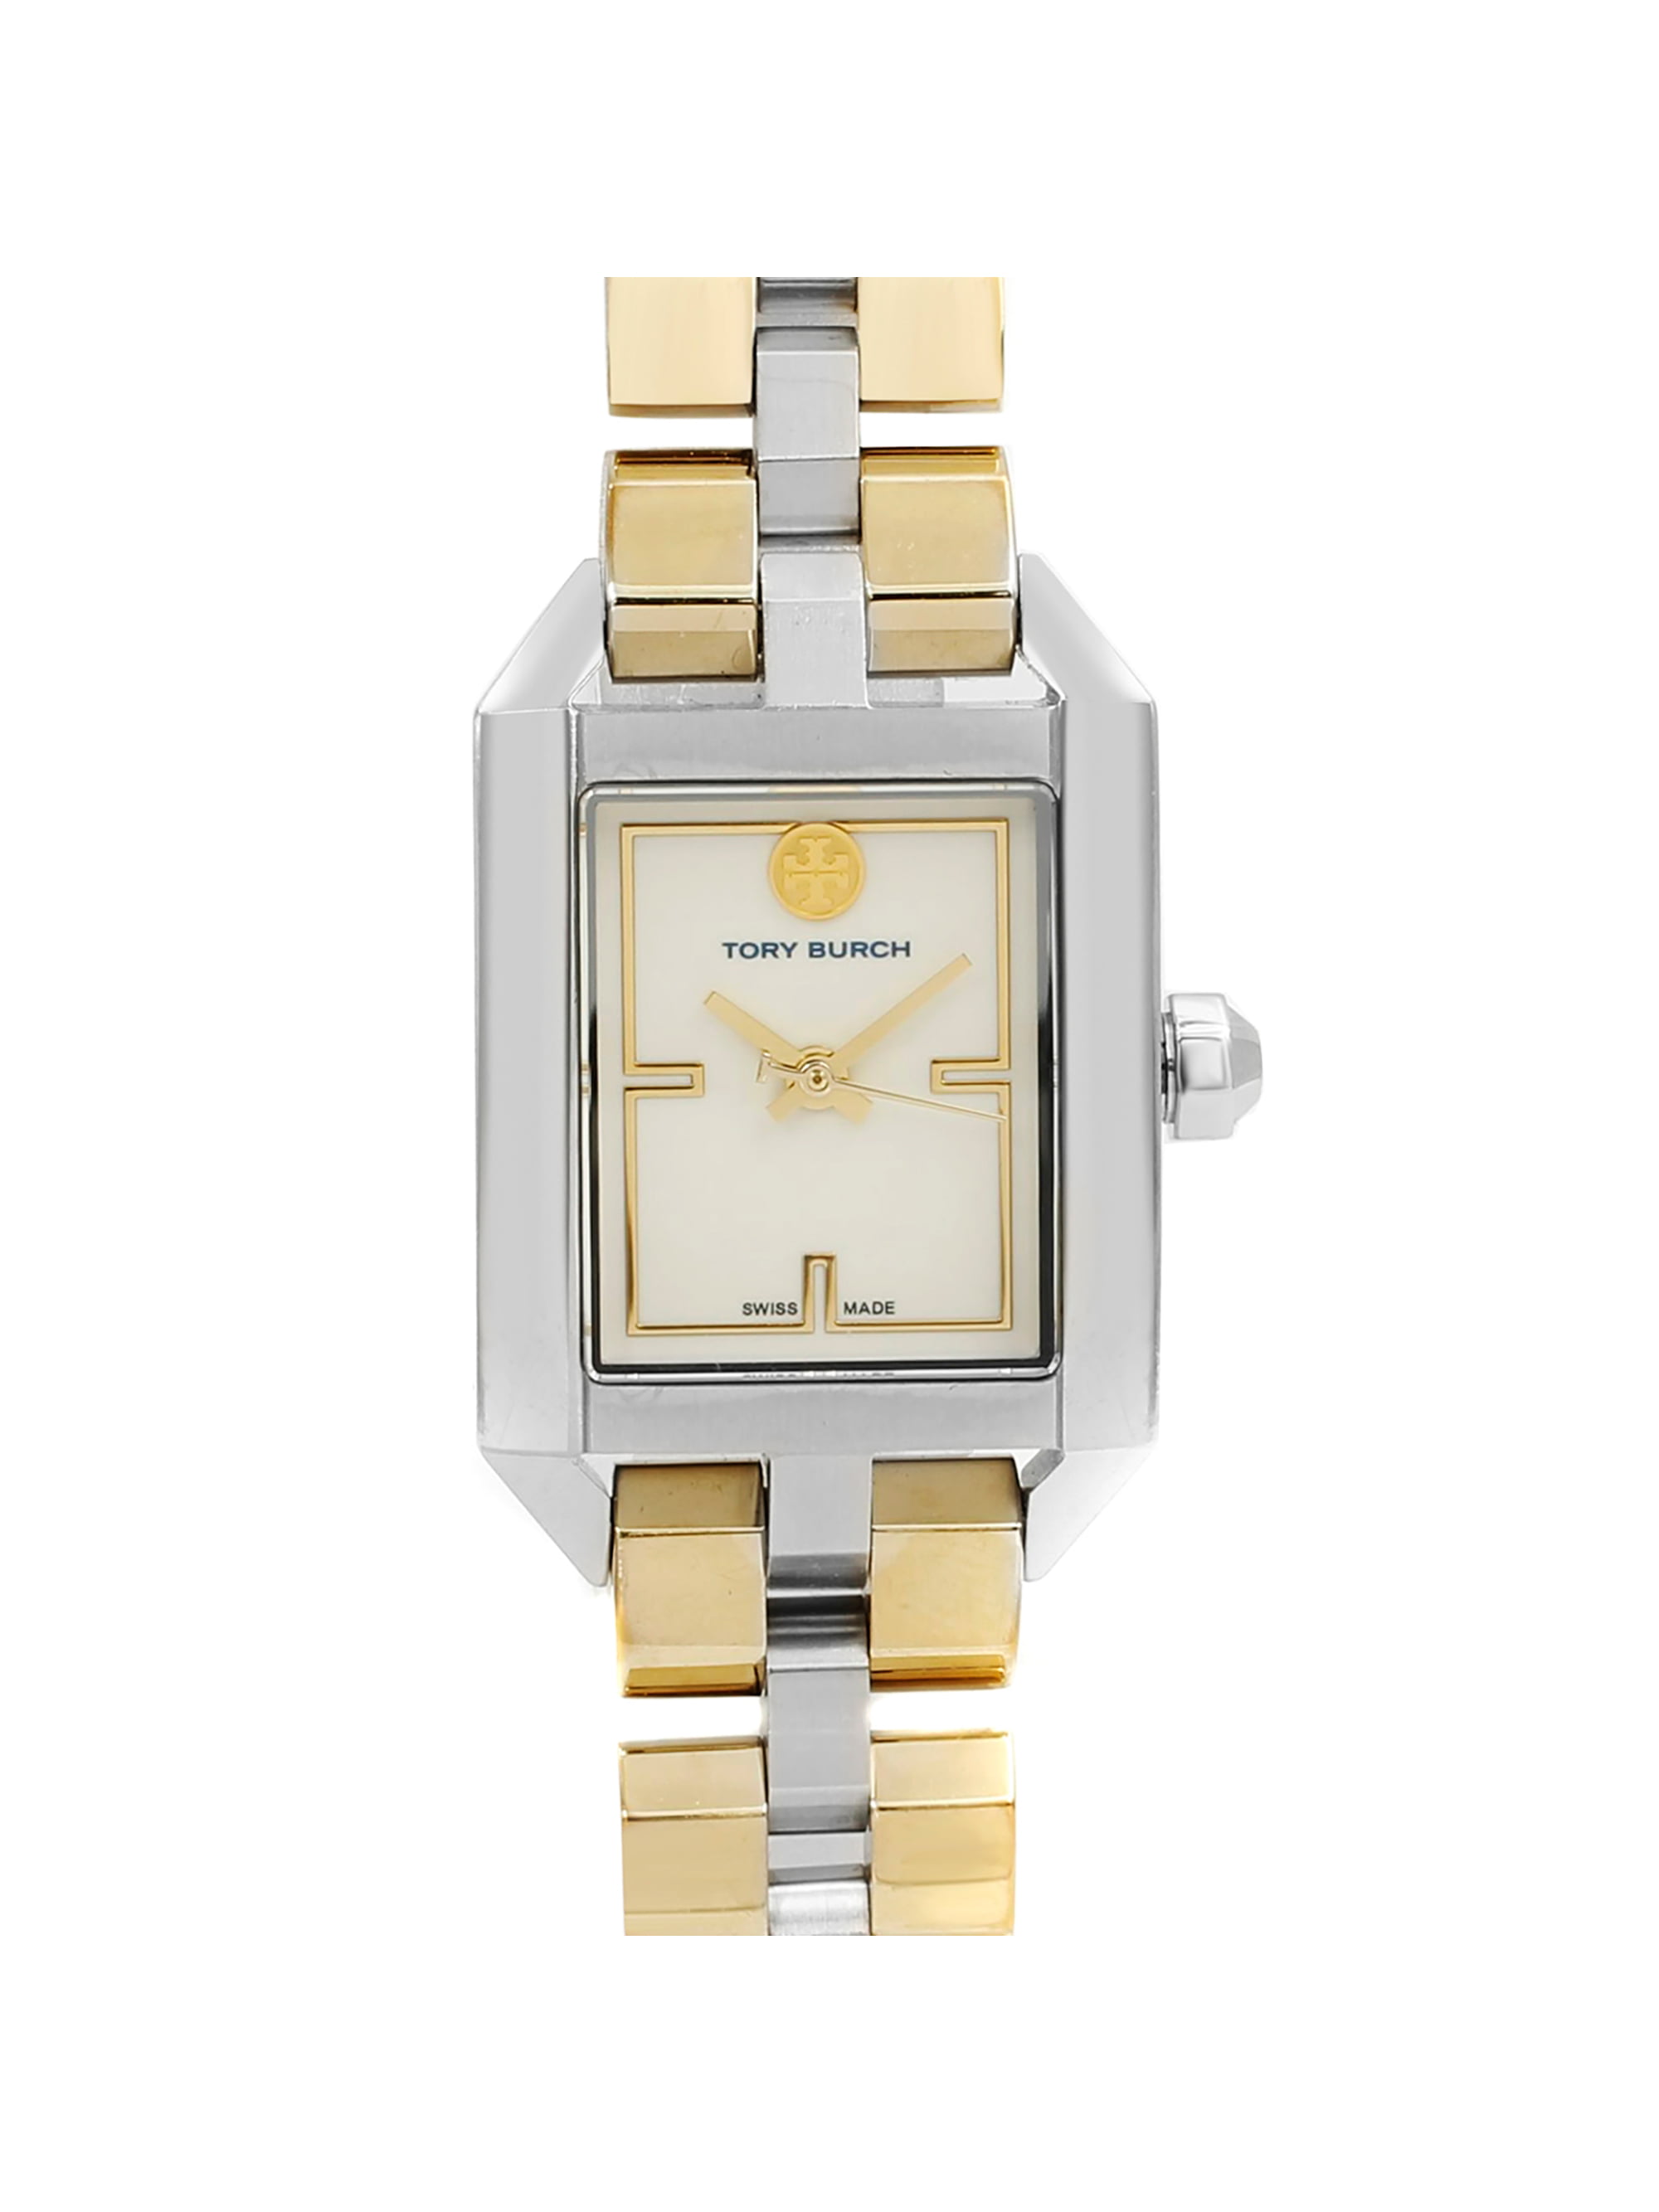 Tory Burch Dalloway Two Tone Steel Cream Dial Rectangle Face Quartz Watch  TB1102 Pre-Owned